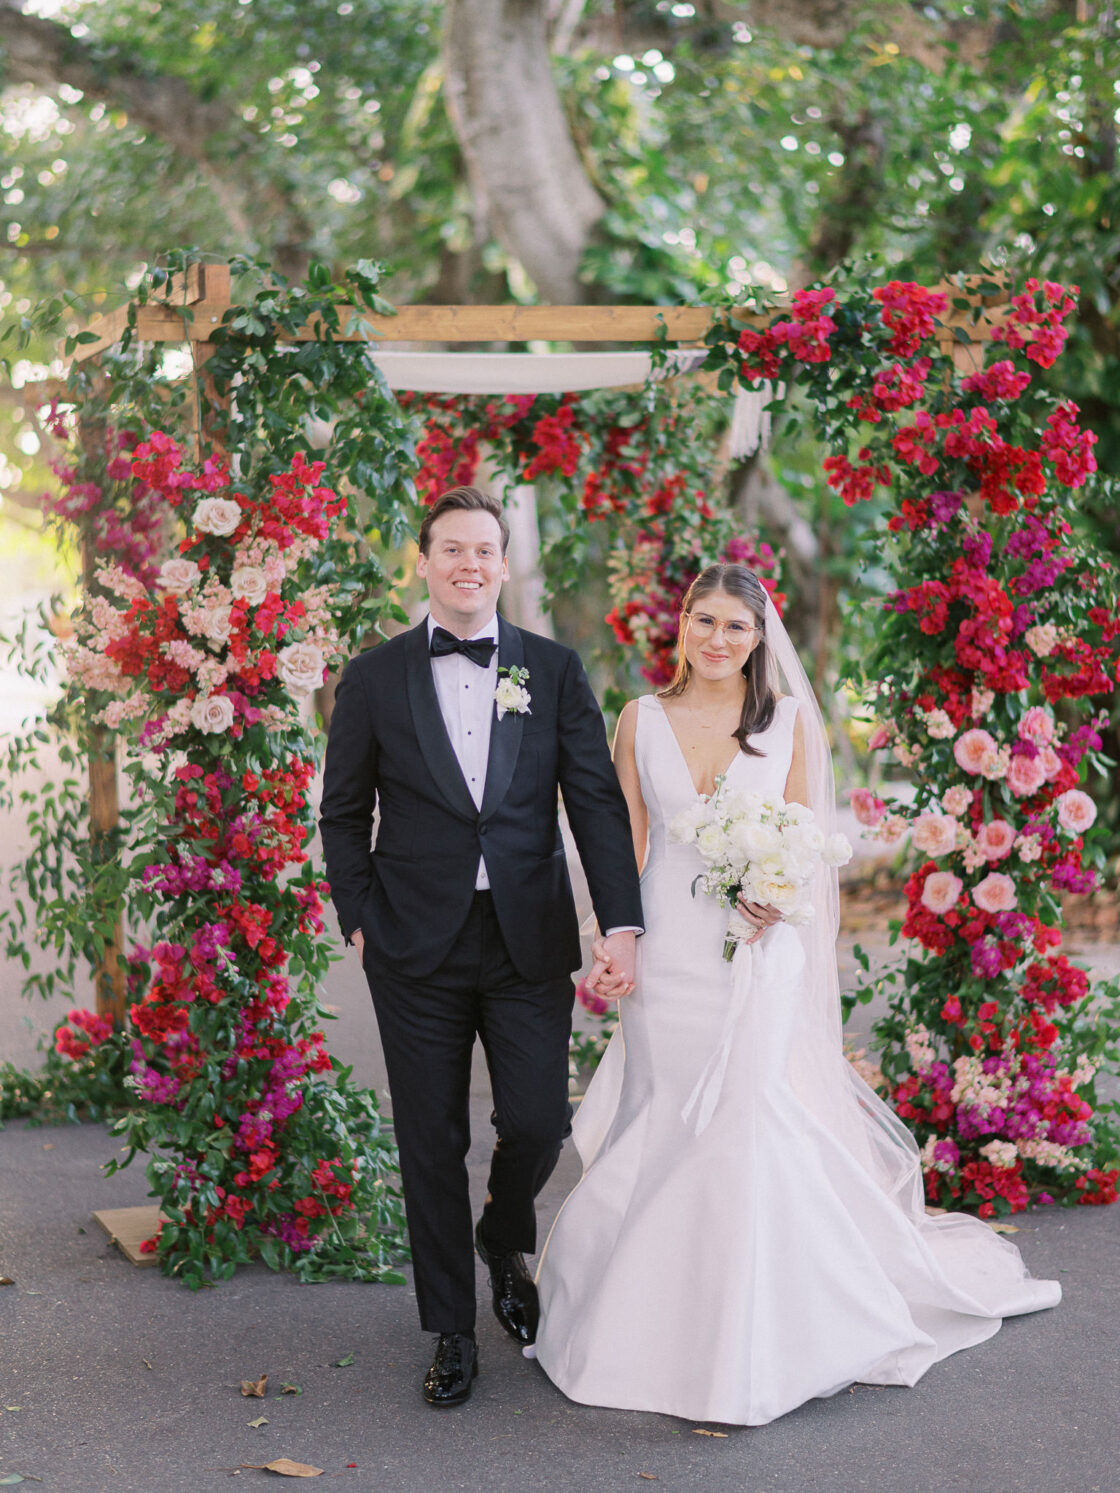 Dreamy Brooklyn Wedding with Flowing Flowers and Hints of Citrus | Elizabeth Anne Designs